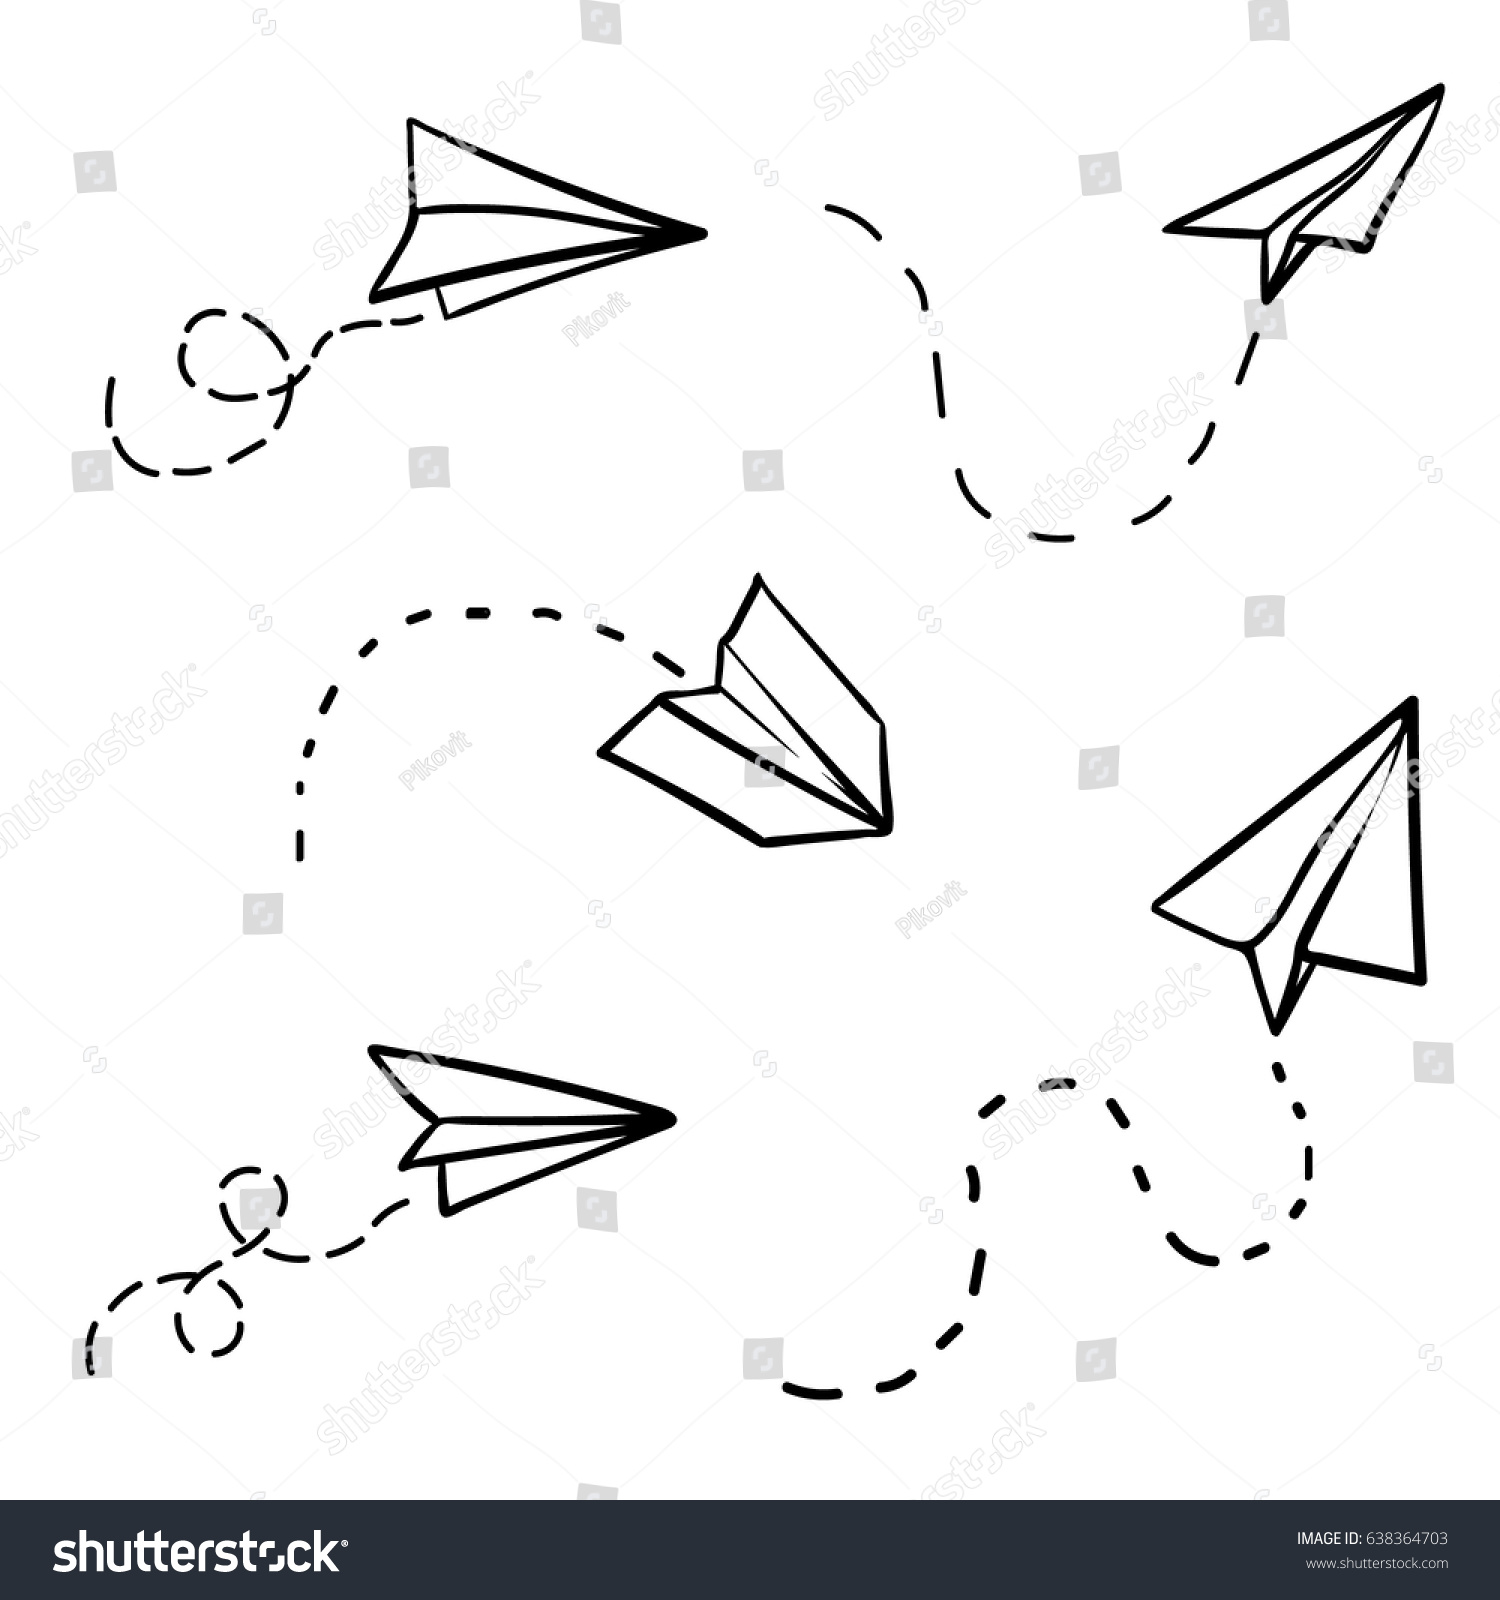 Vector paper airplane. Travel, route symbol. Set of vector illustration of hand drawn paper plane. Isolated. Outline. Hand drawn doodle airplane. Black linear paper plane icon. #638364703